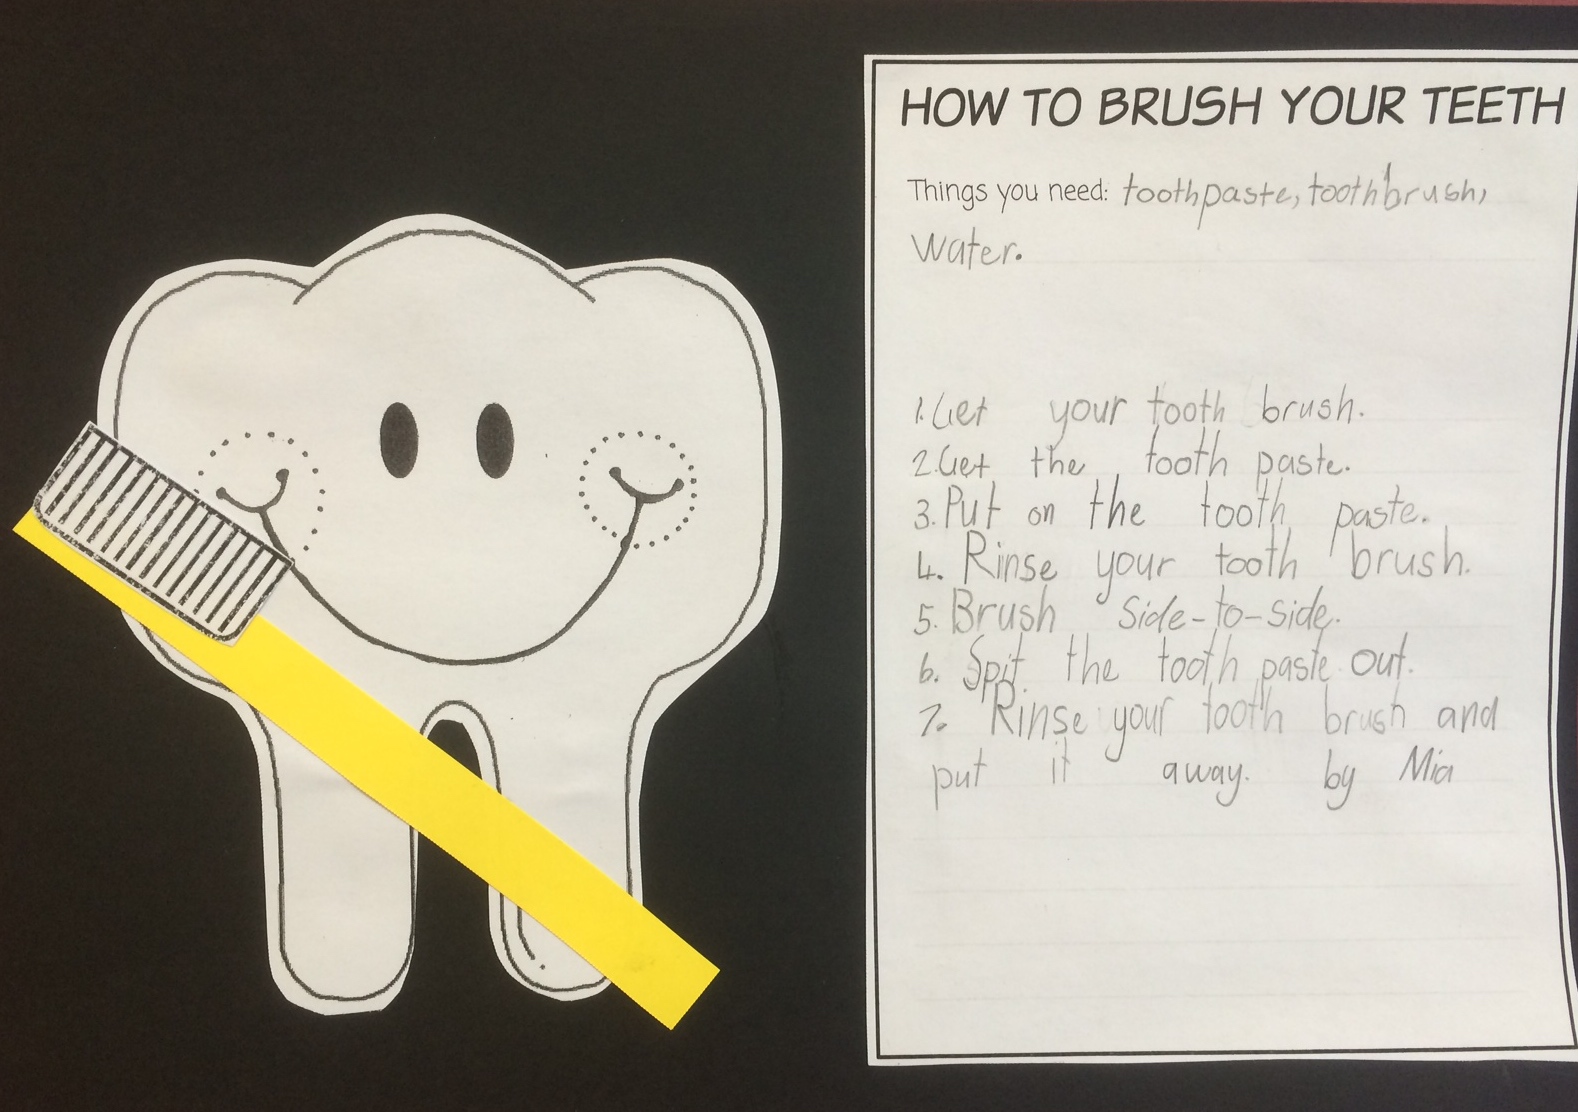 instructions to how to brush your teeth